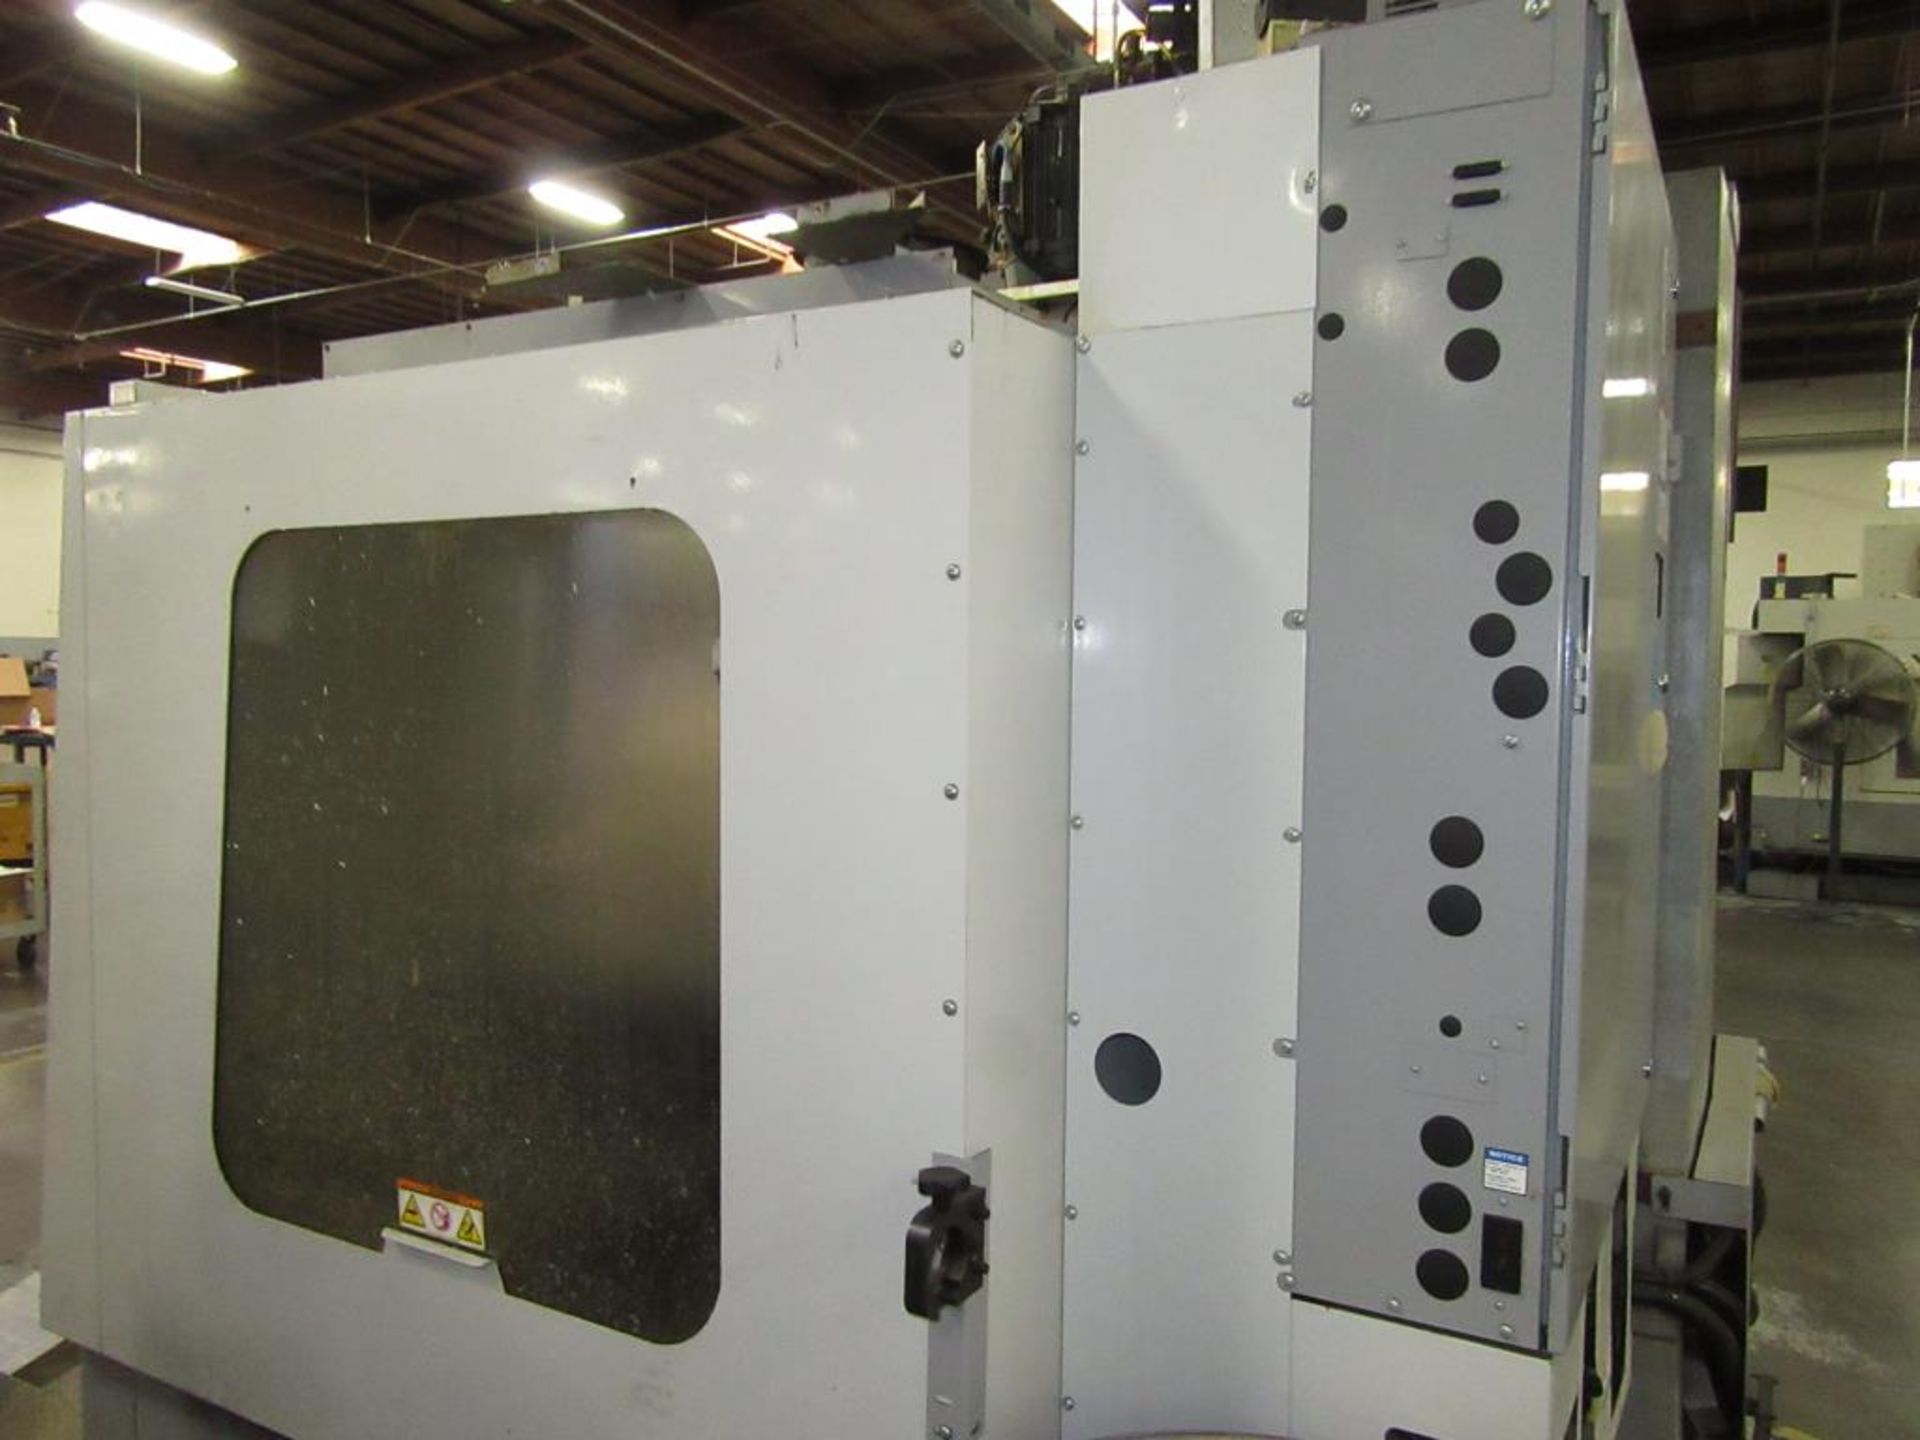 Haas VF-3BYT. 2008 - CNC Vertical Machining Center with Haas 3-Axis Control Panel, Table Size 54"L x - Image 13 of 15